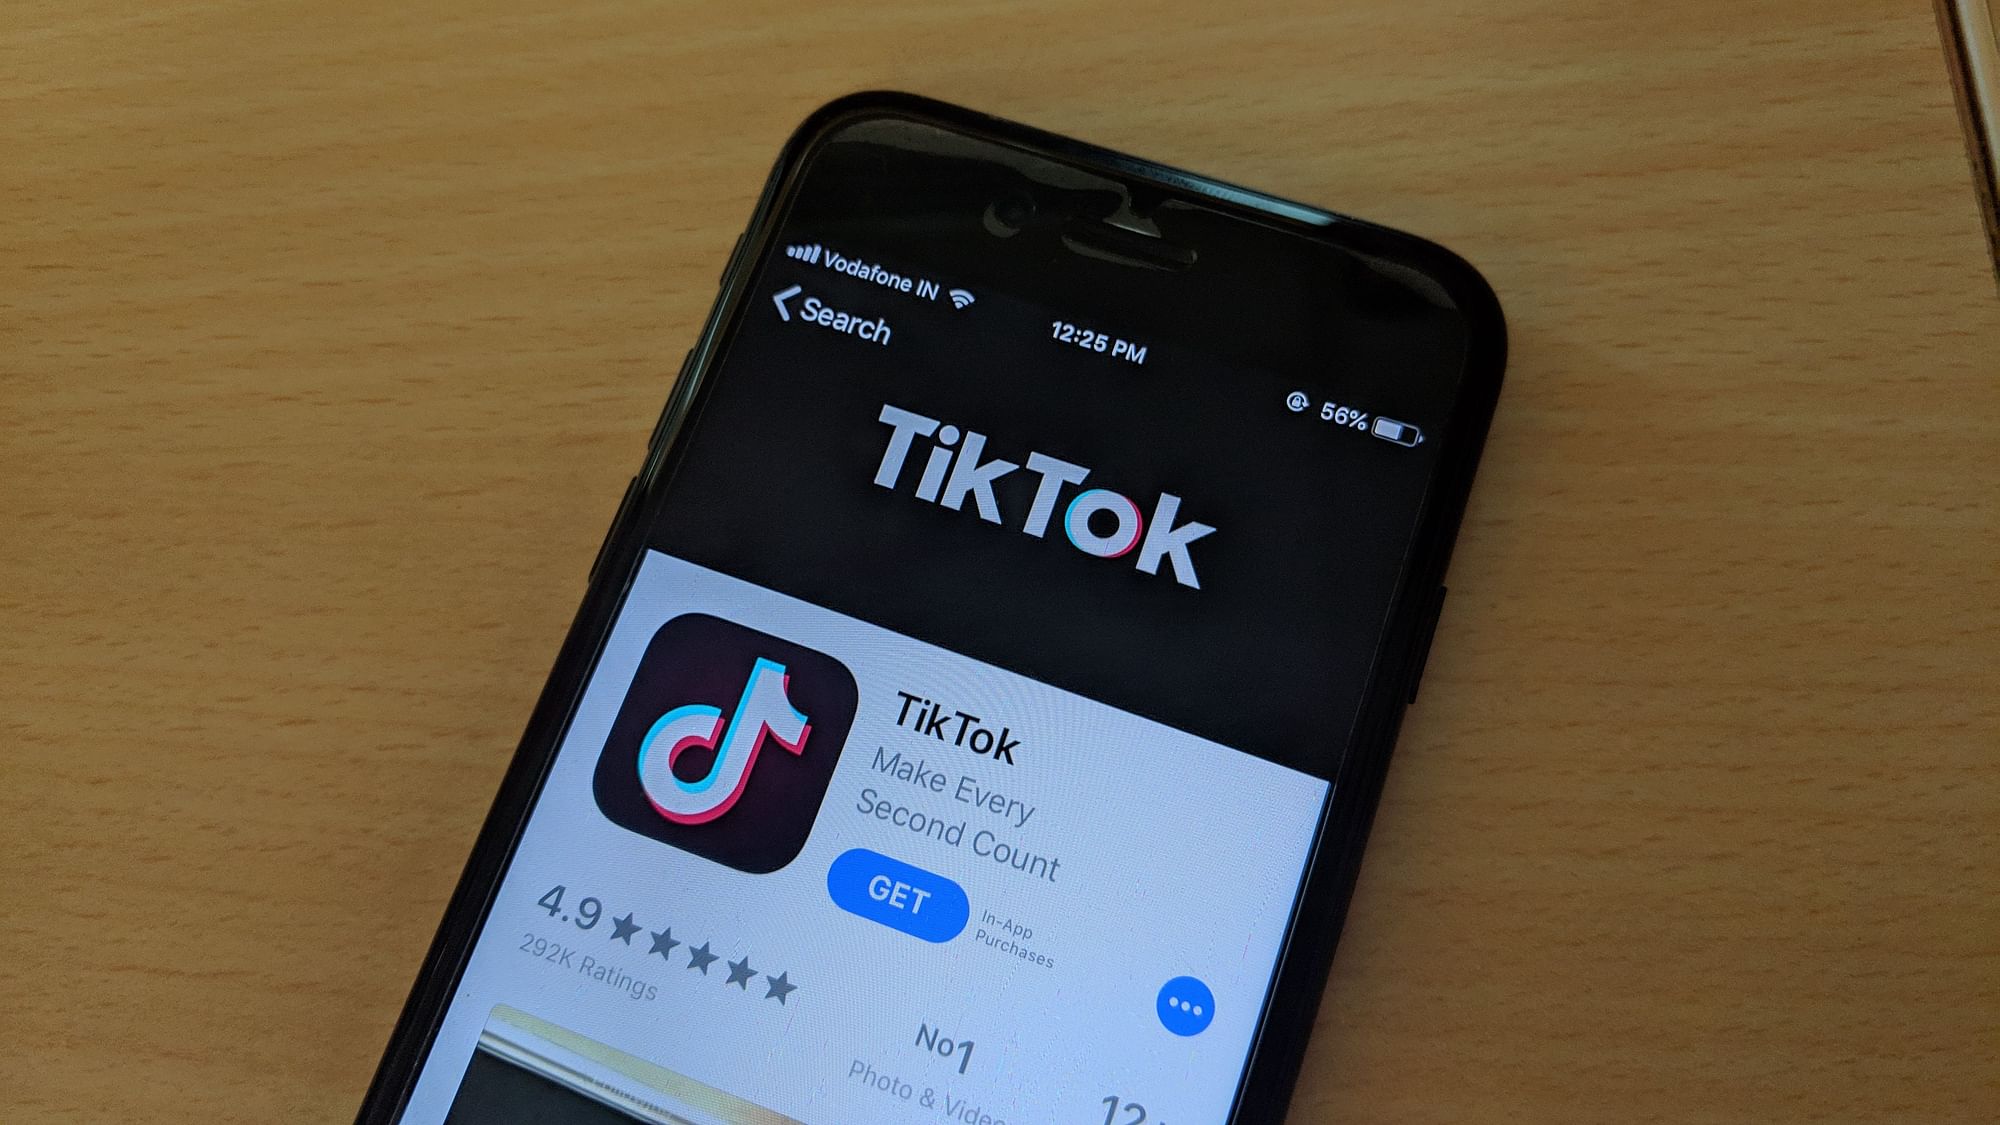 TikTok is still available on the app stores in India.